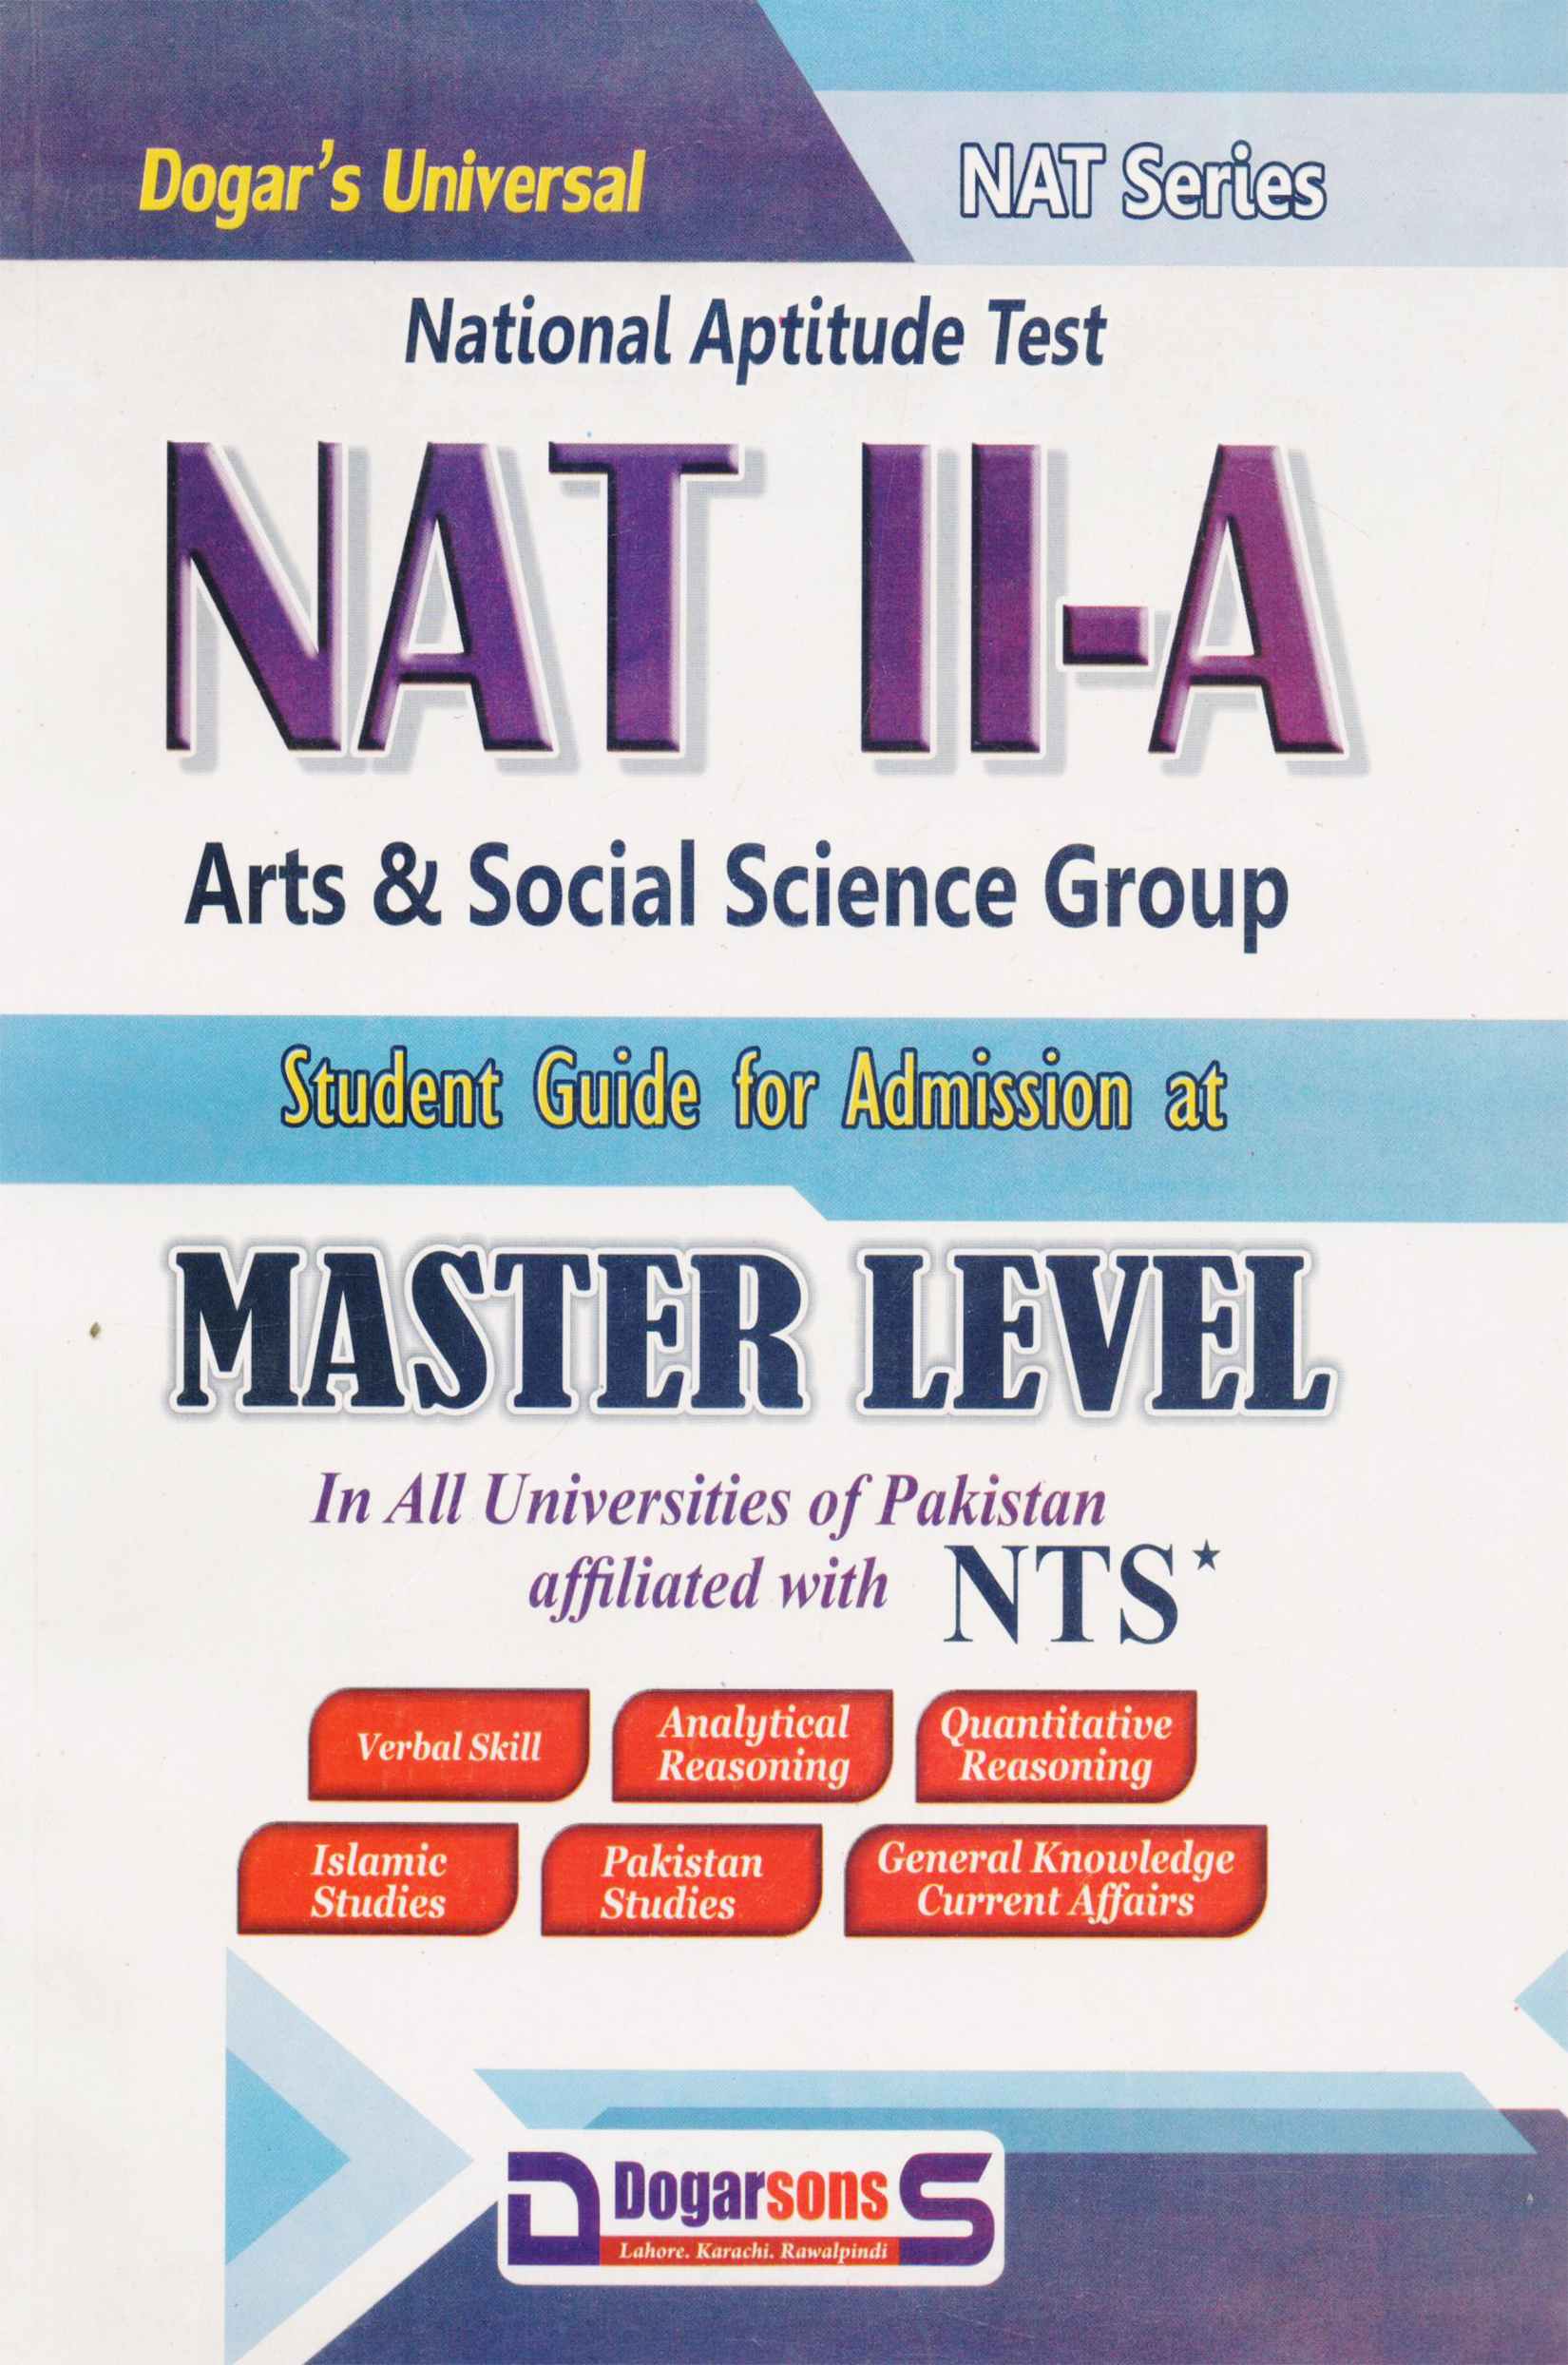 nat-11-a-book-for-arts-and-social-science-group-by-dogar-pak-army-ranks